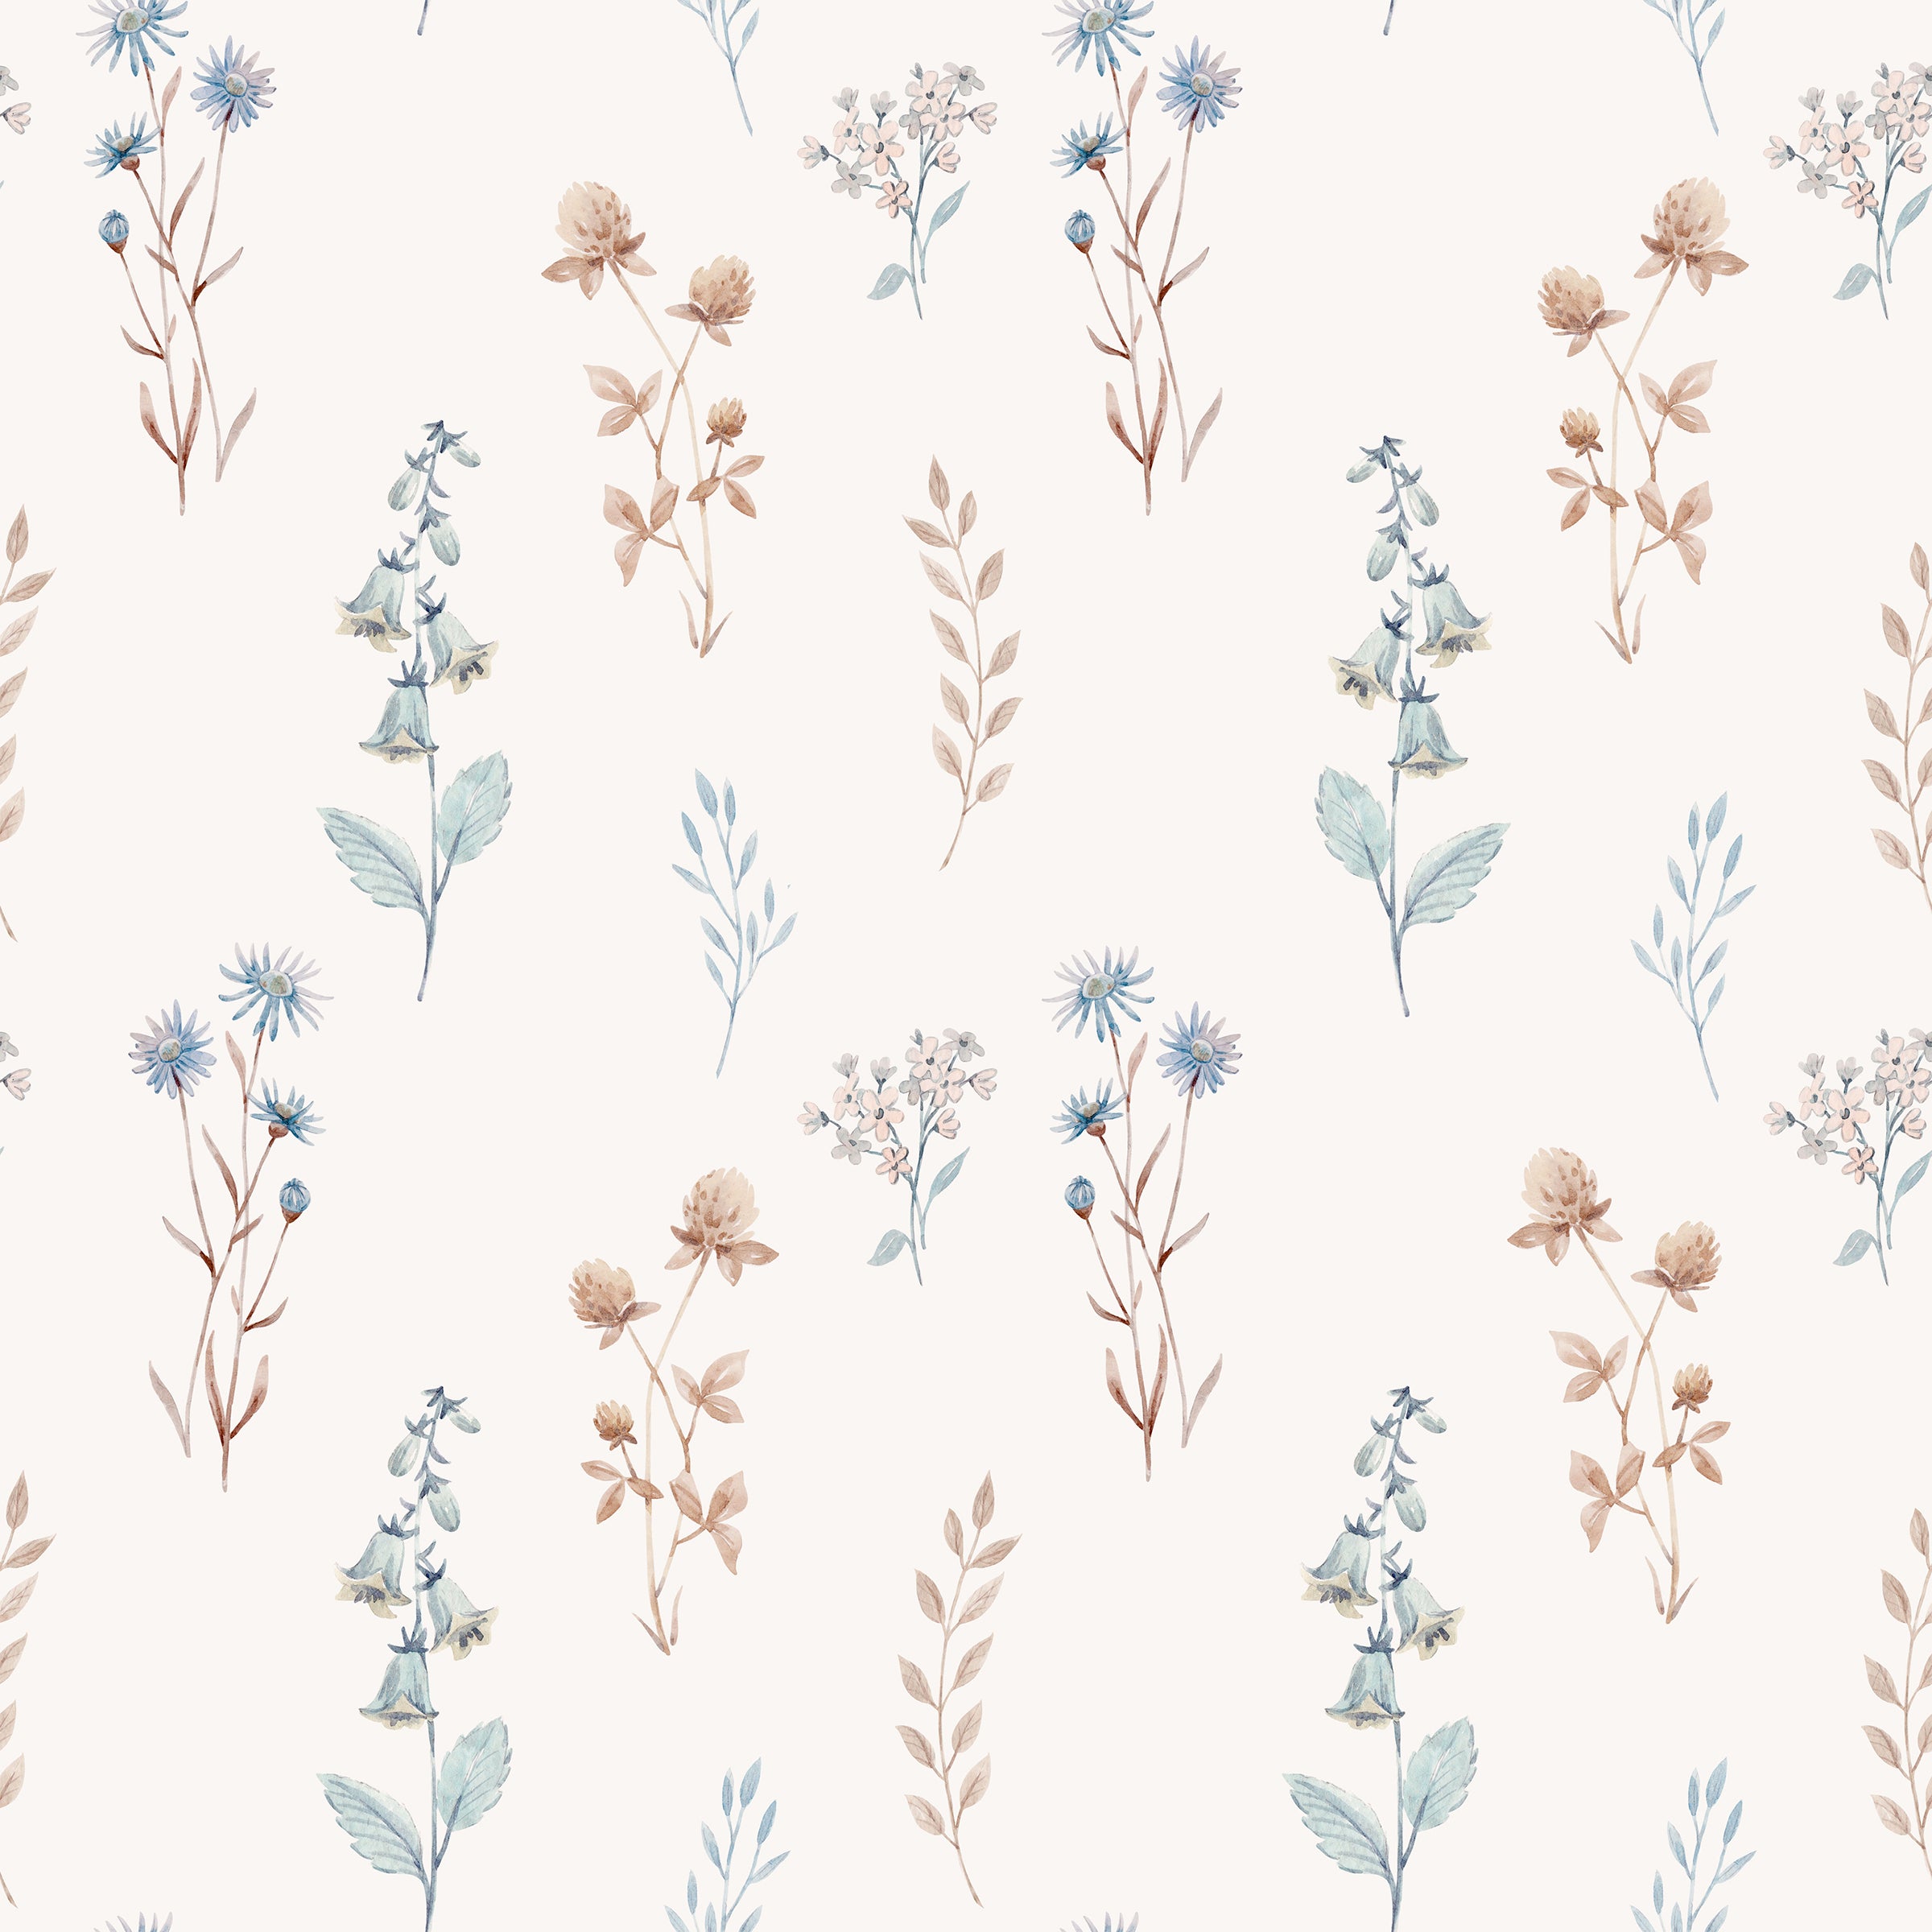 Close-up view of the Bluebell Floral Wallpaper, displaying an intricate pattern of various flowers and leaves in soft pastel tones of blue, tan, and green, set against a light background.